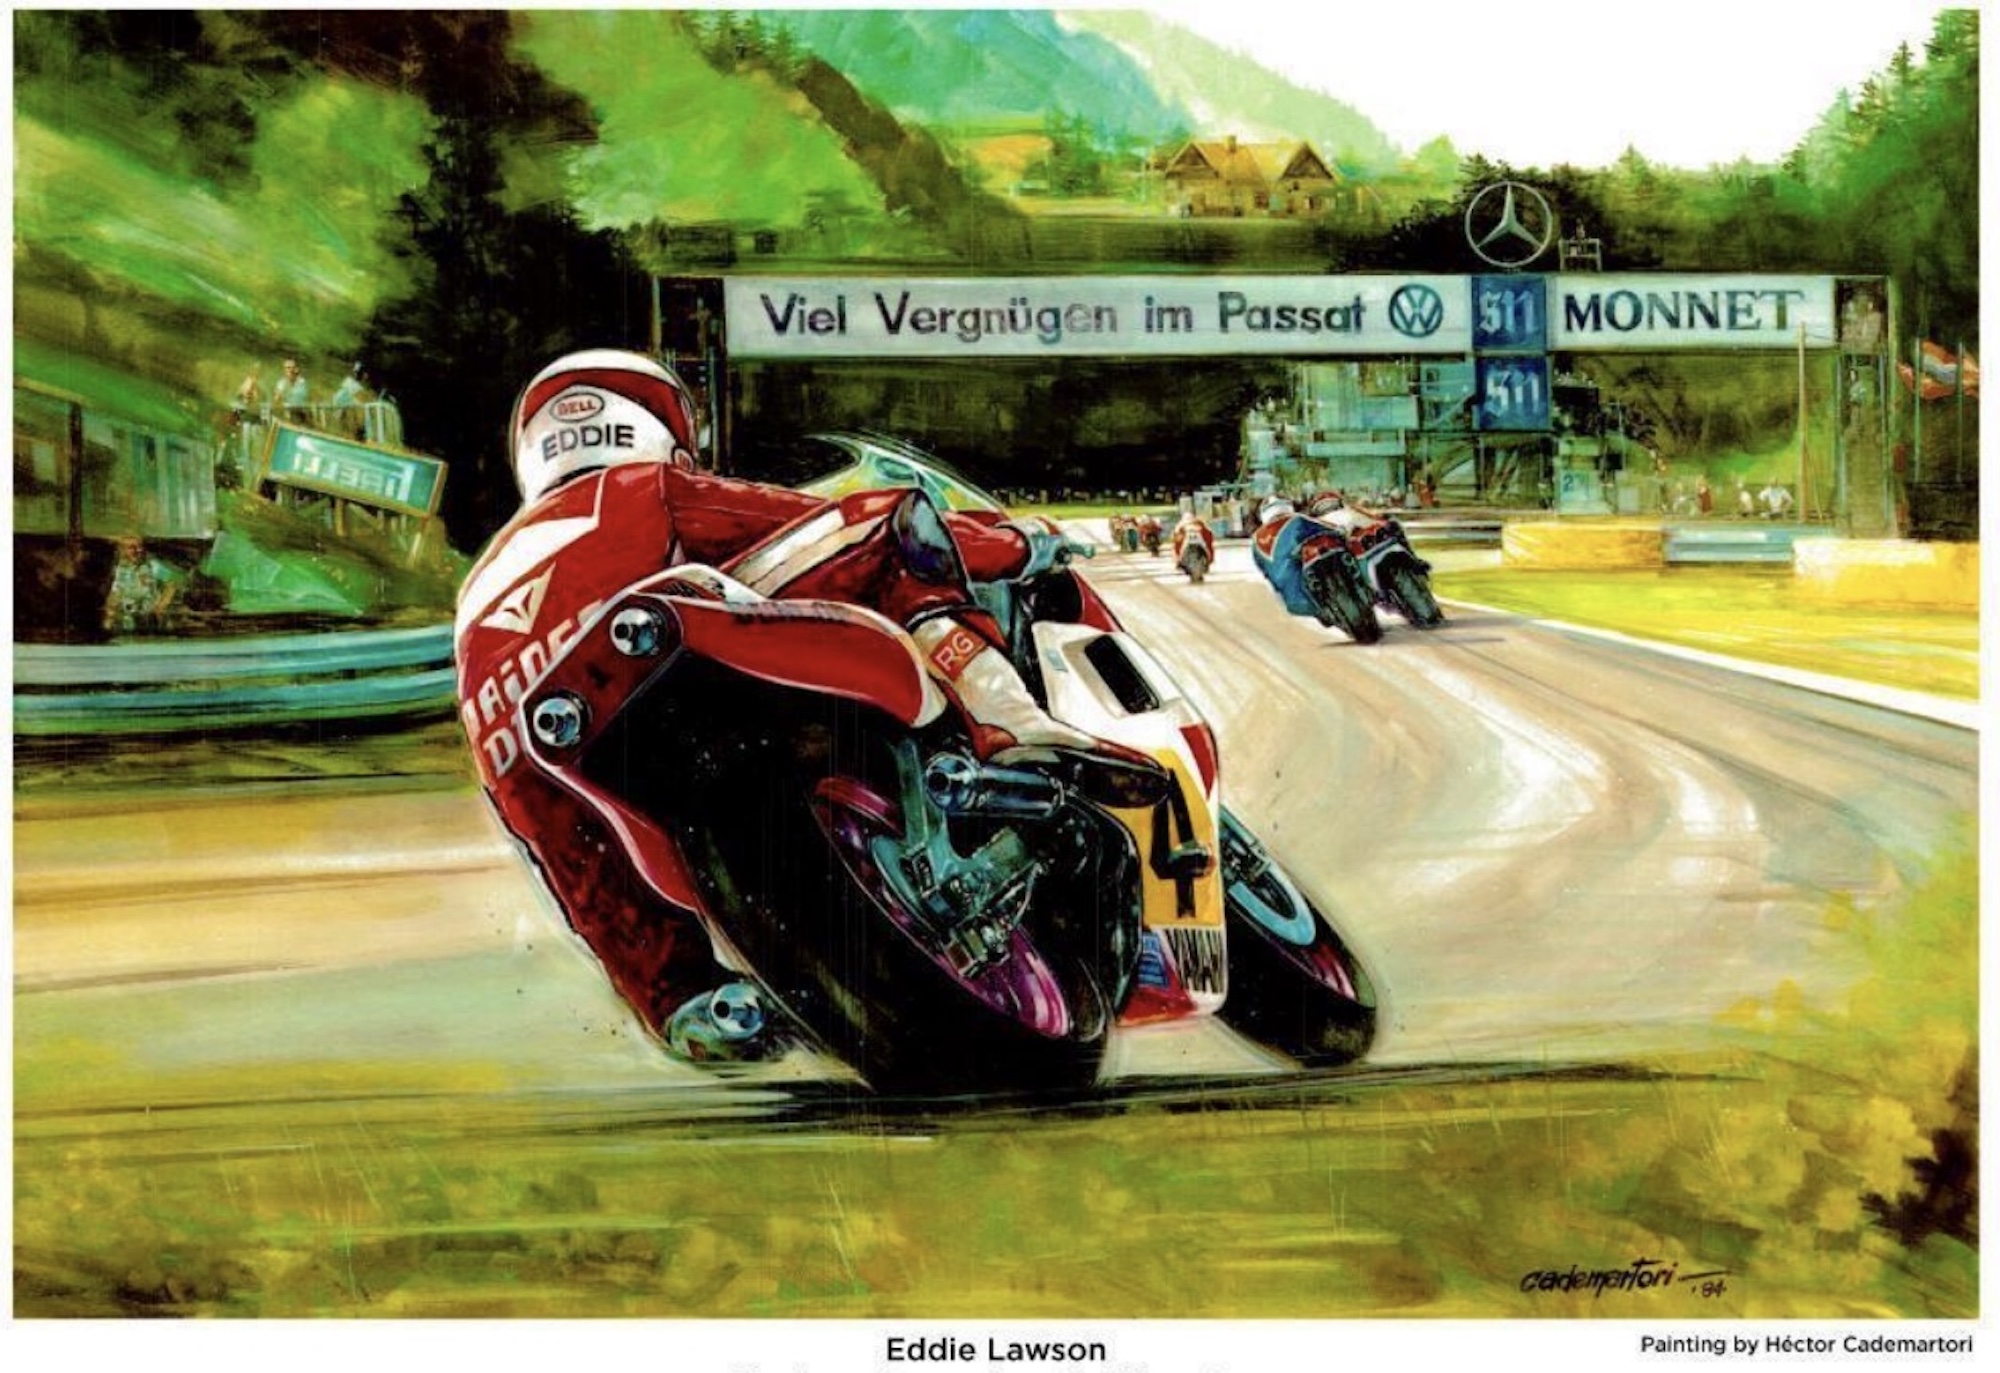 A Sample print available with donations made in support of Gary LaPlante. Media sourced from Motorcycle.com News